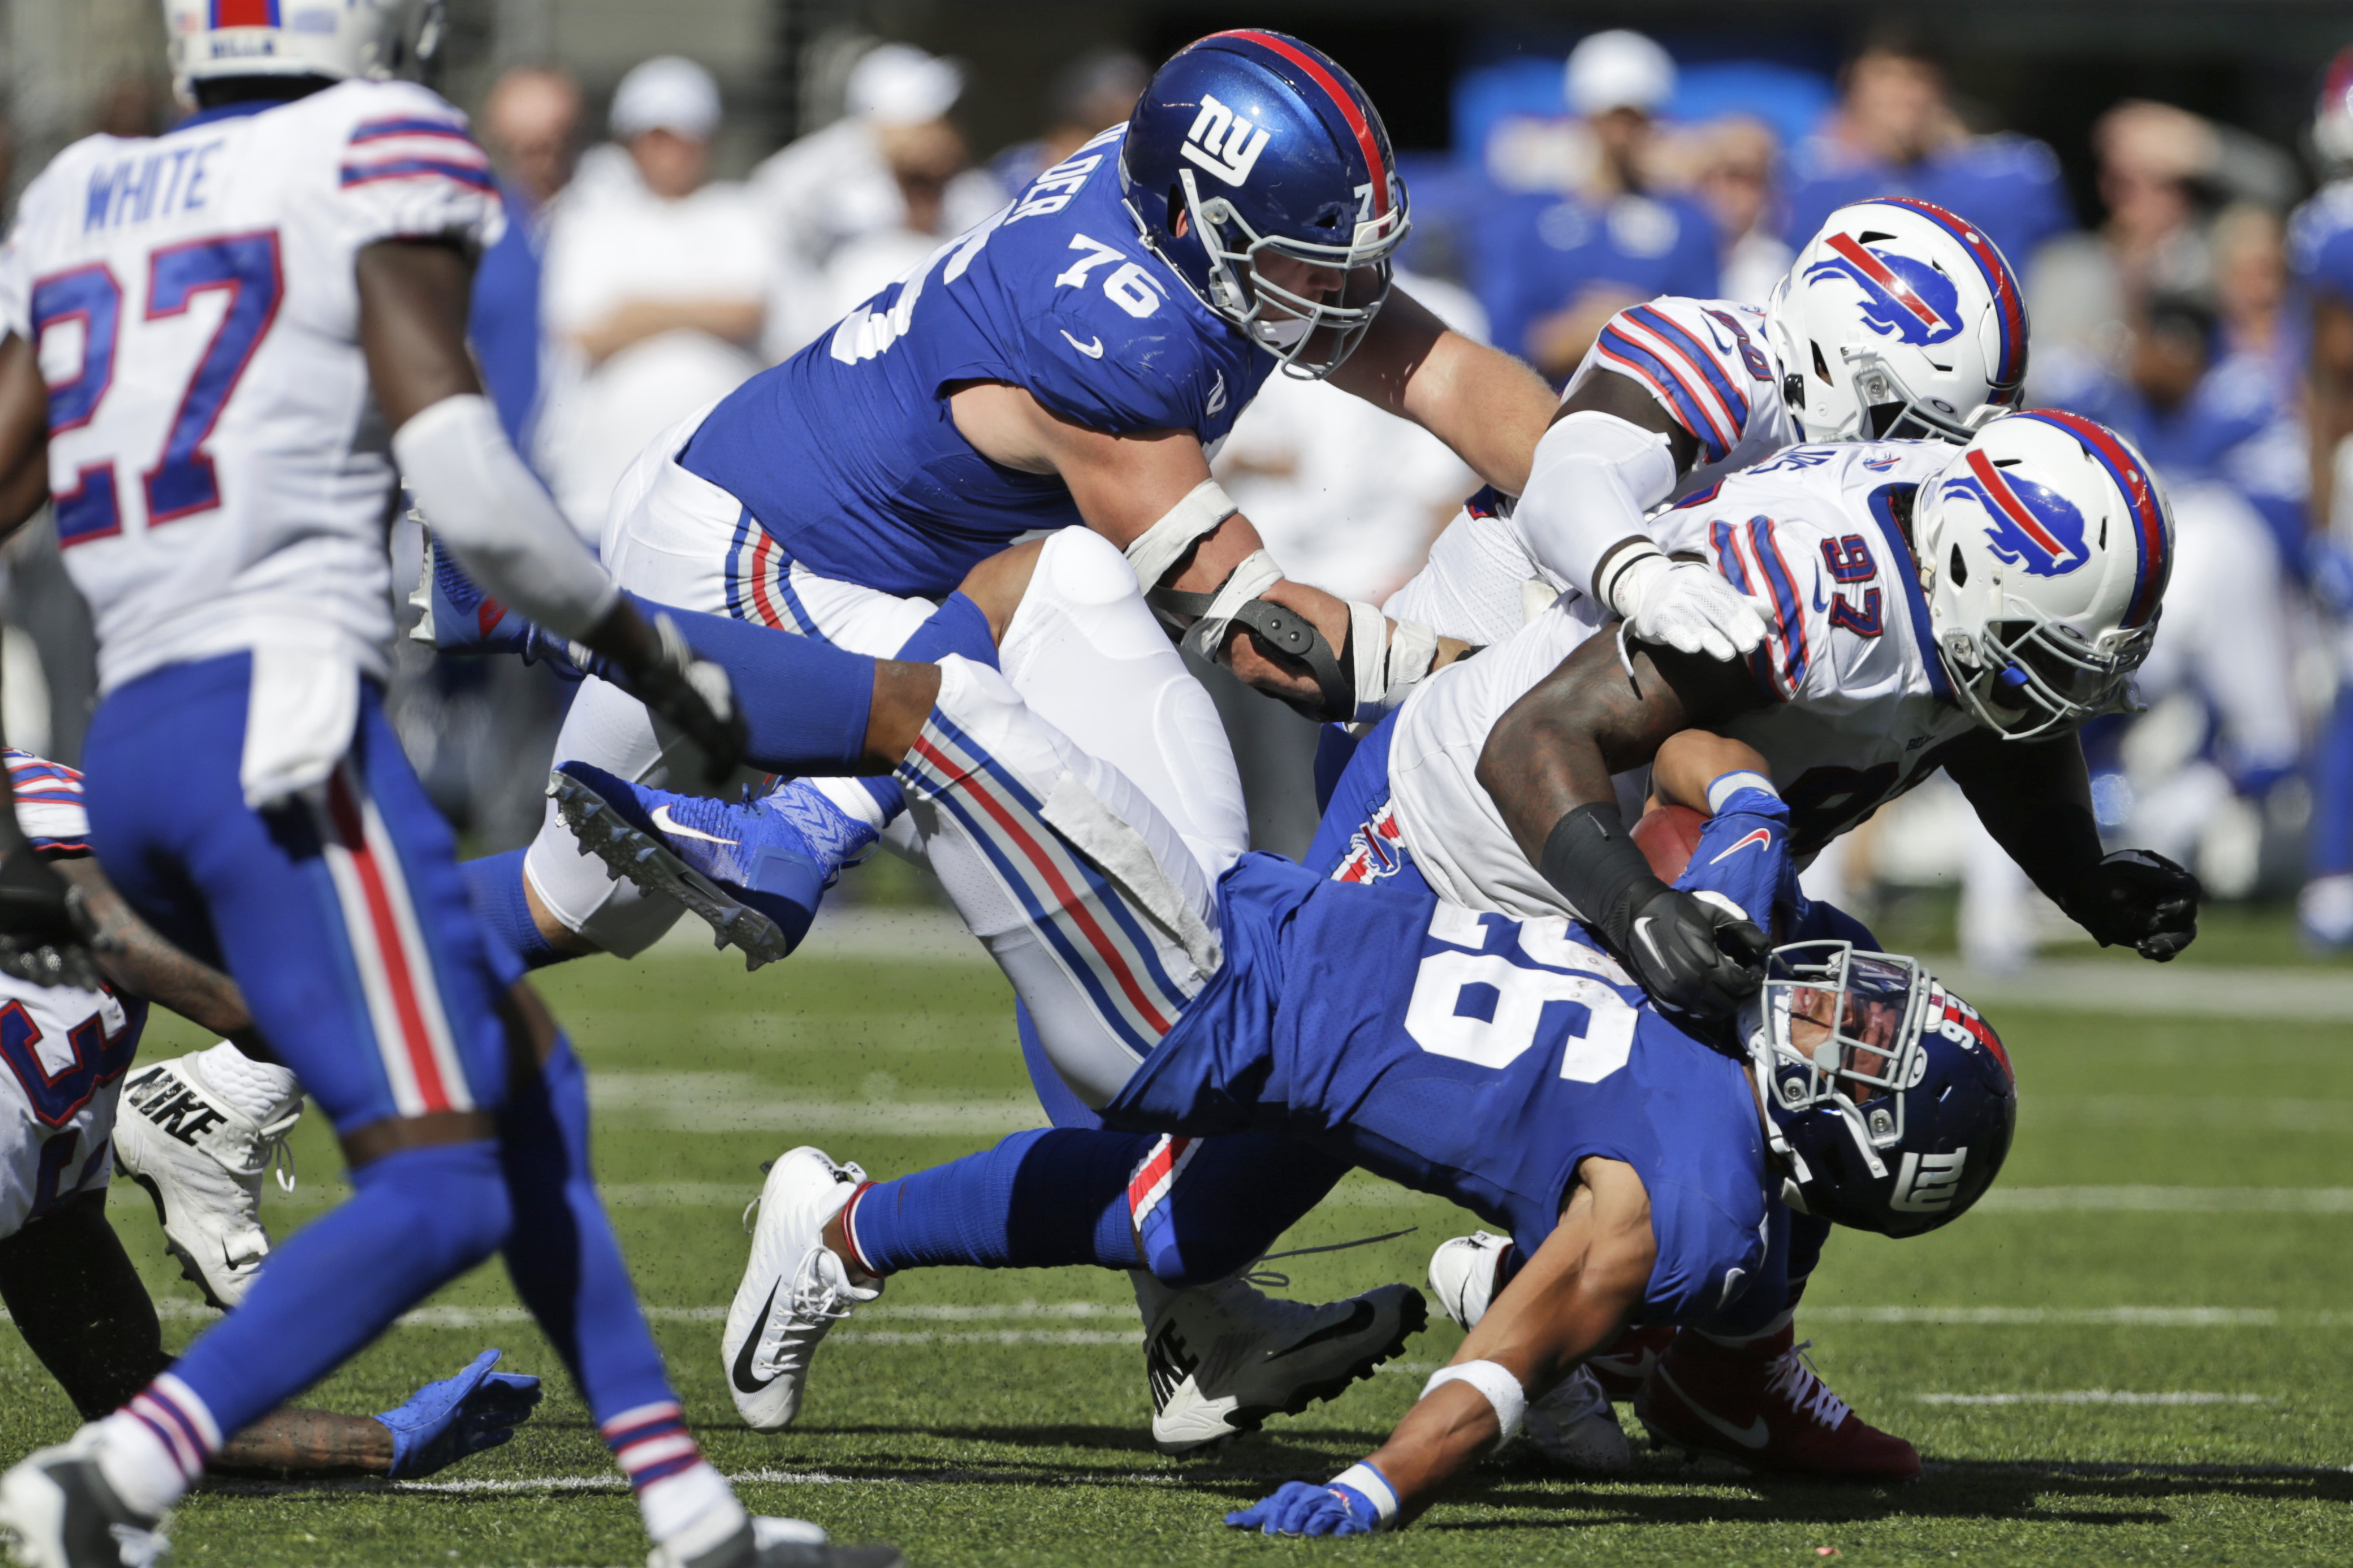 While Jones was great, Giants need a lot more from defense